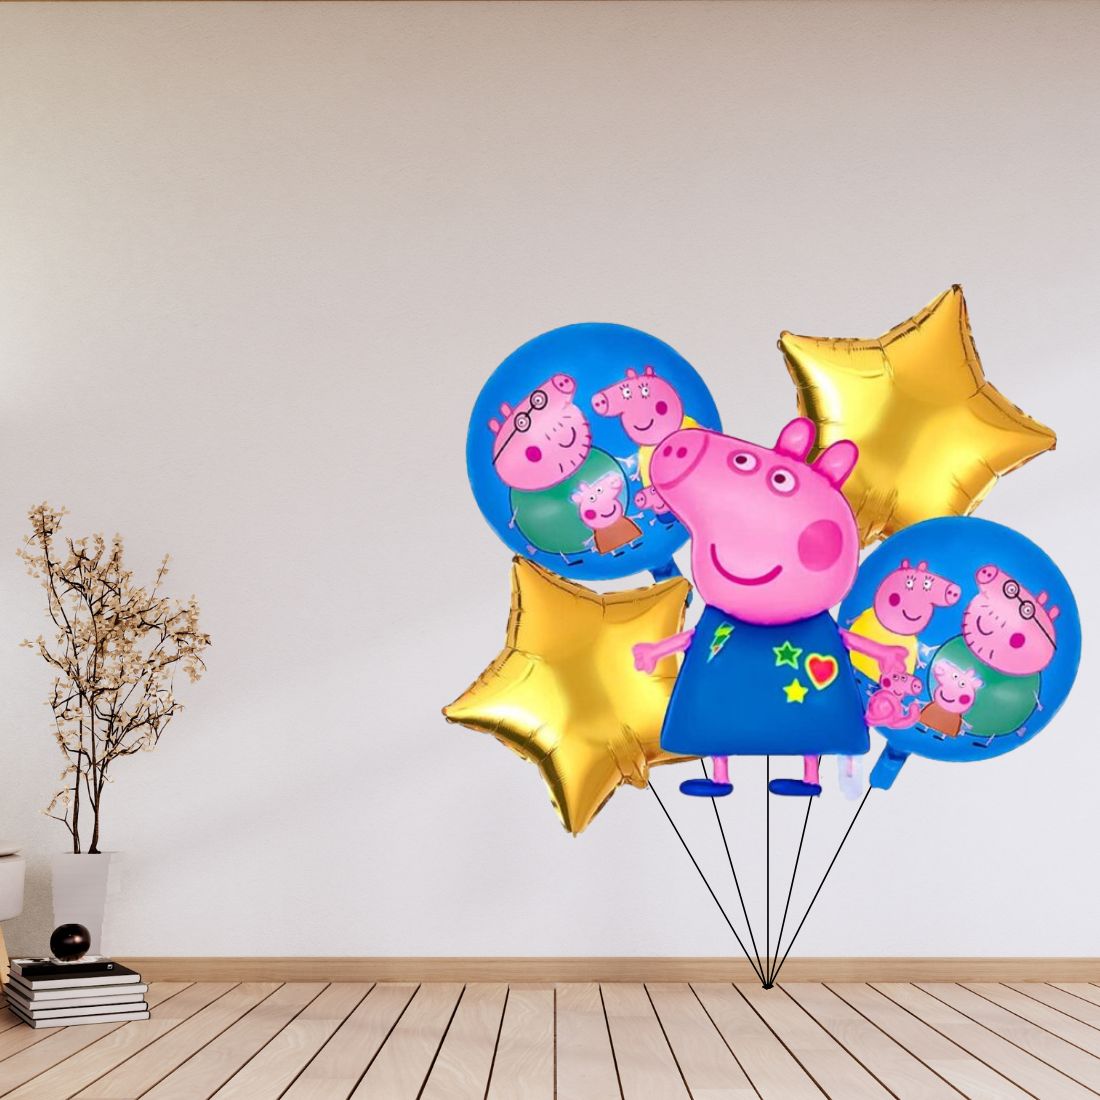 Peppa Pig Birthday Decoration Party Foil Balloon- Set of 5